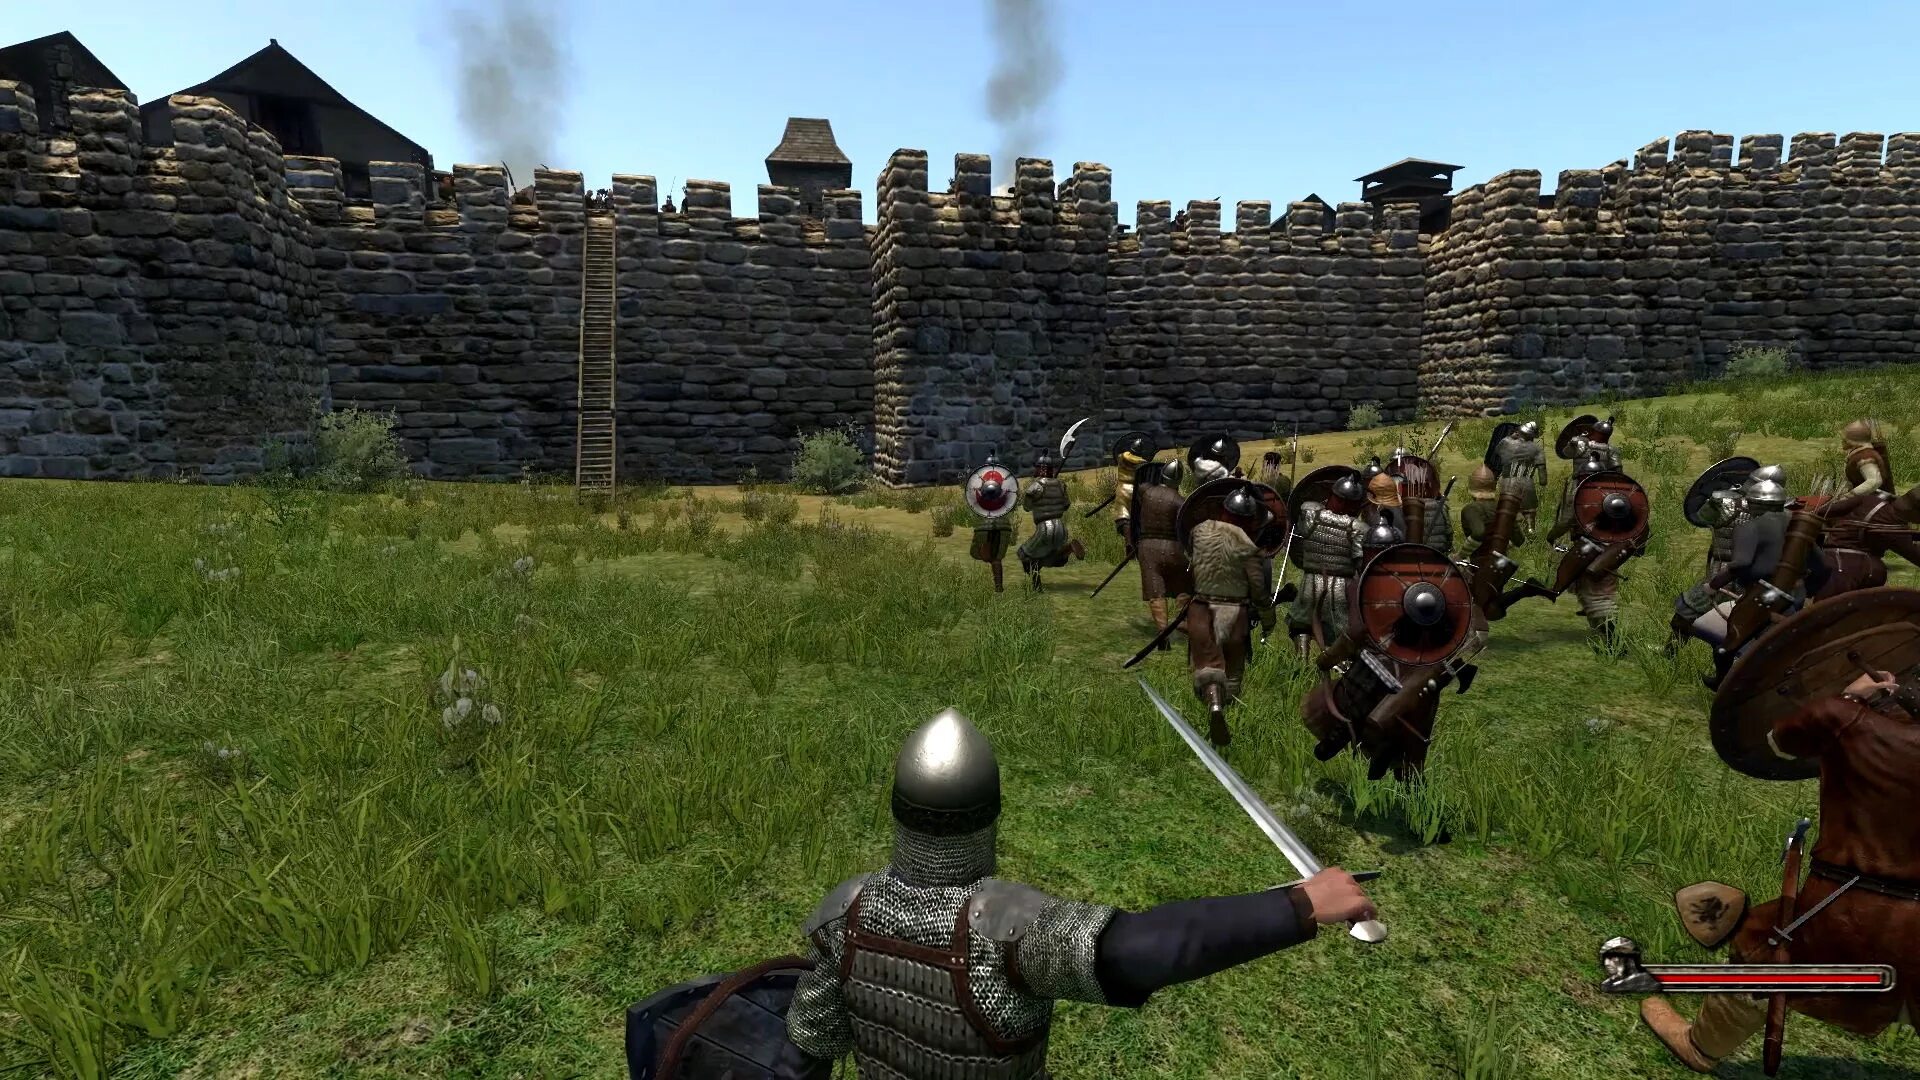 Mount & Blade: Warband. Mount and Blade 2010. Игра Mount & Blade 3. Варбанд баннерлорд. Steam warband